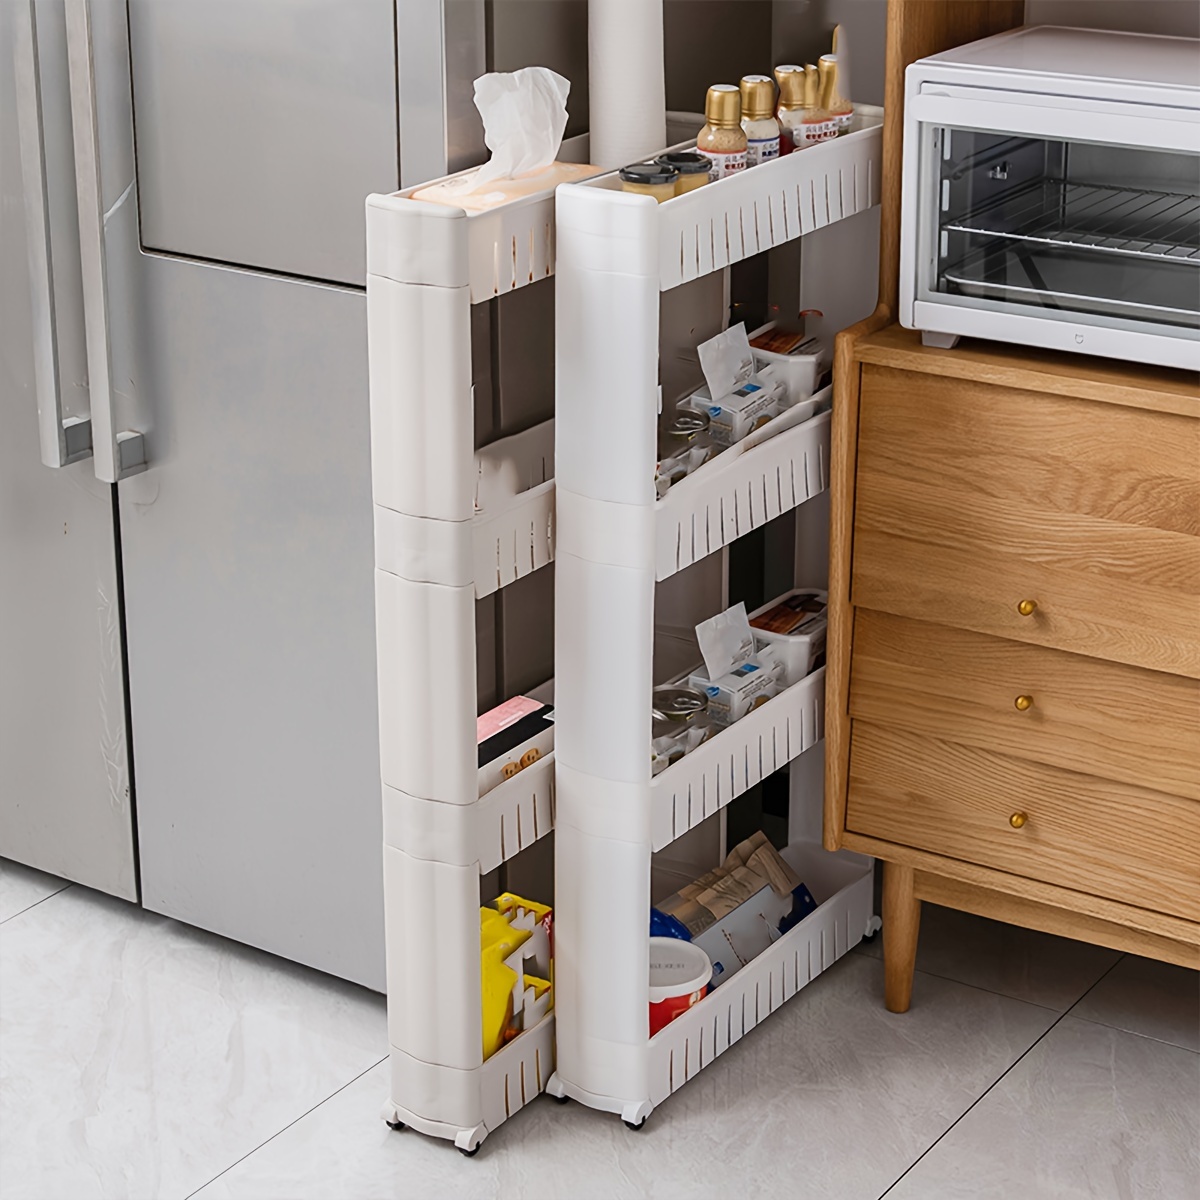 Shop Bathroom Slit Storage Cabinet with great discounts and prices